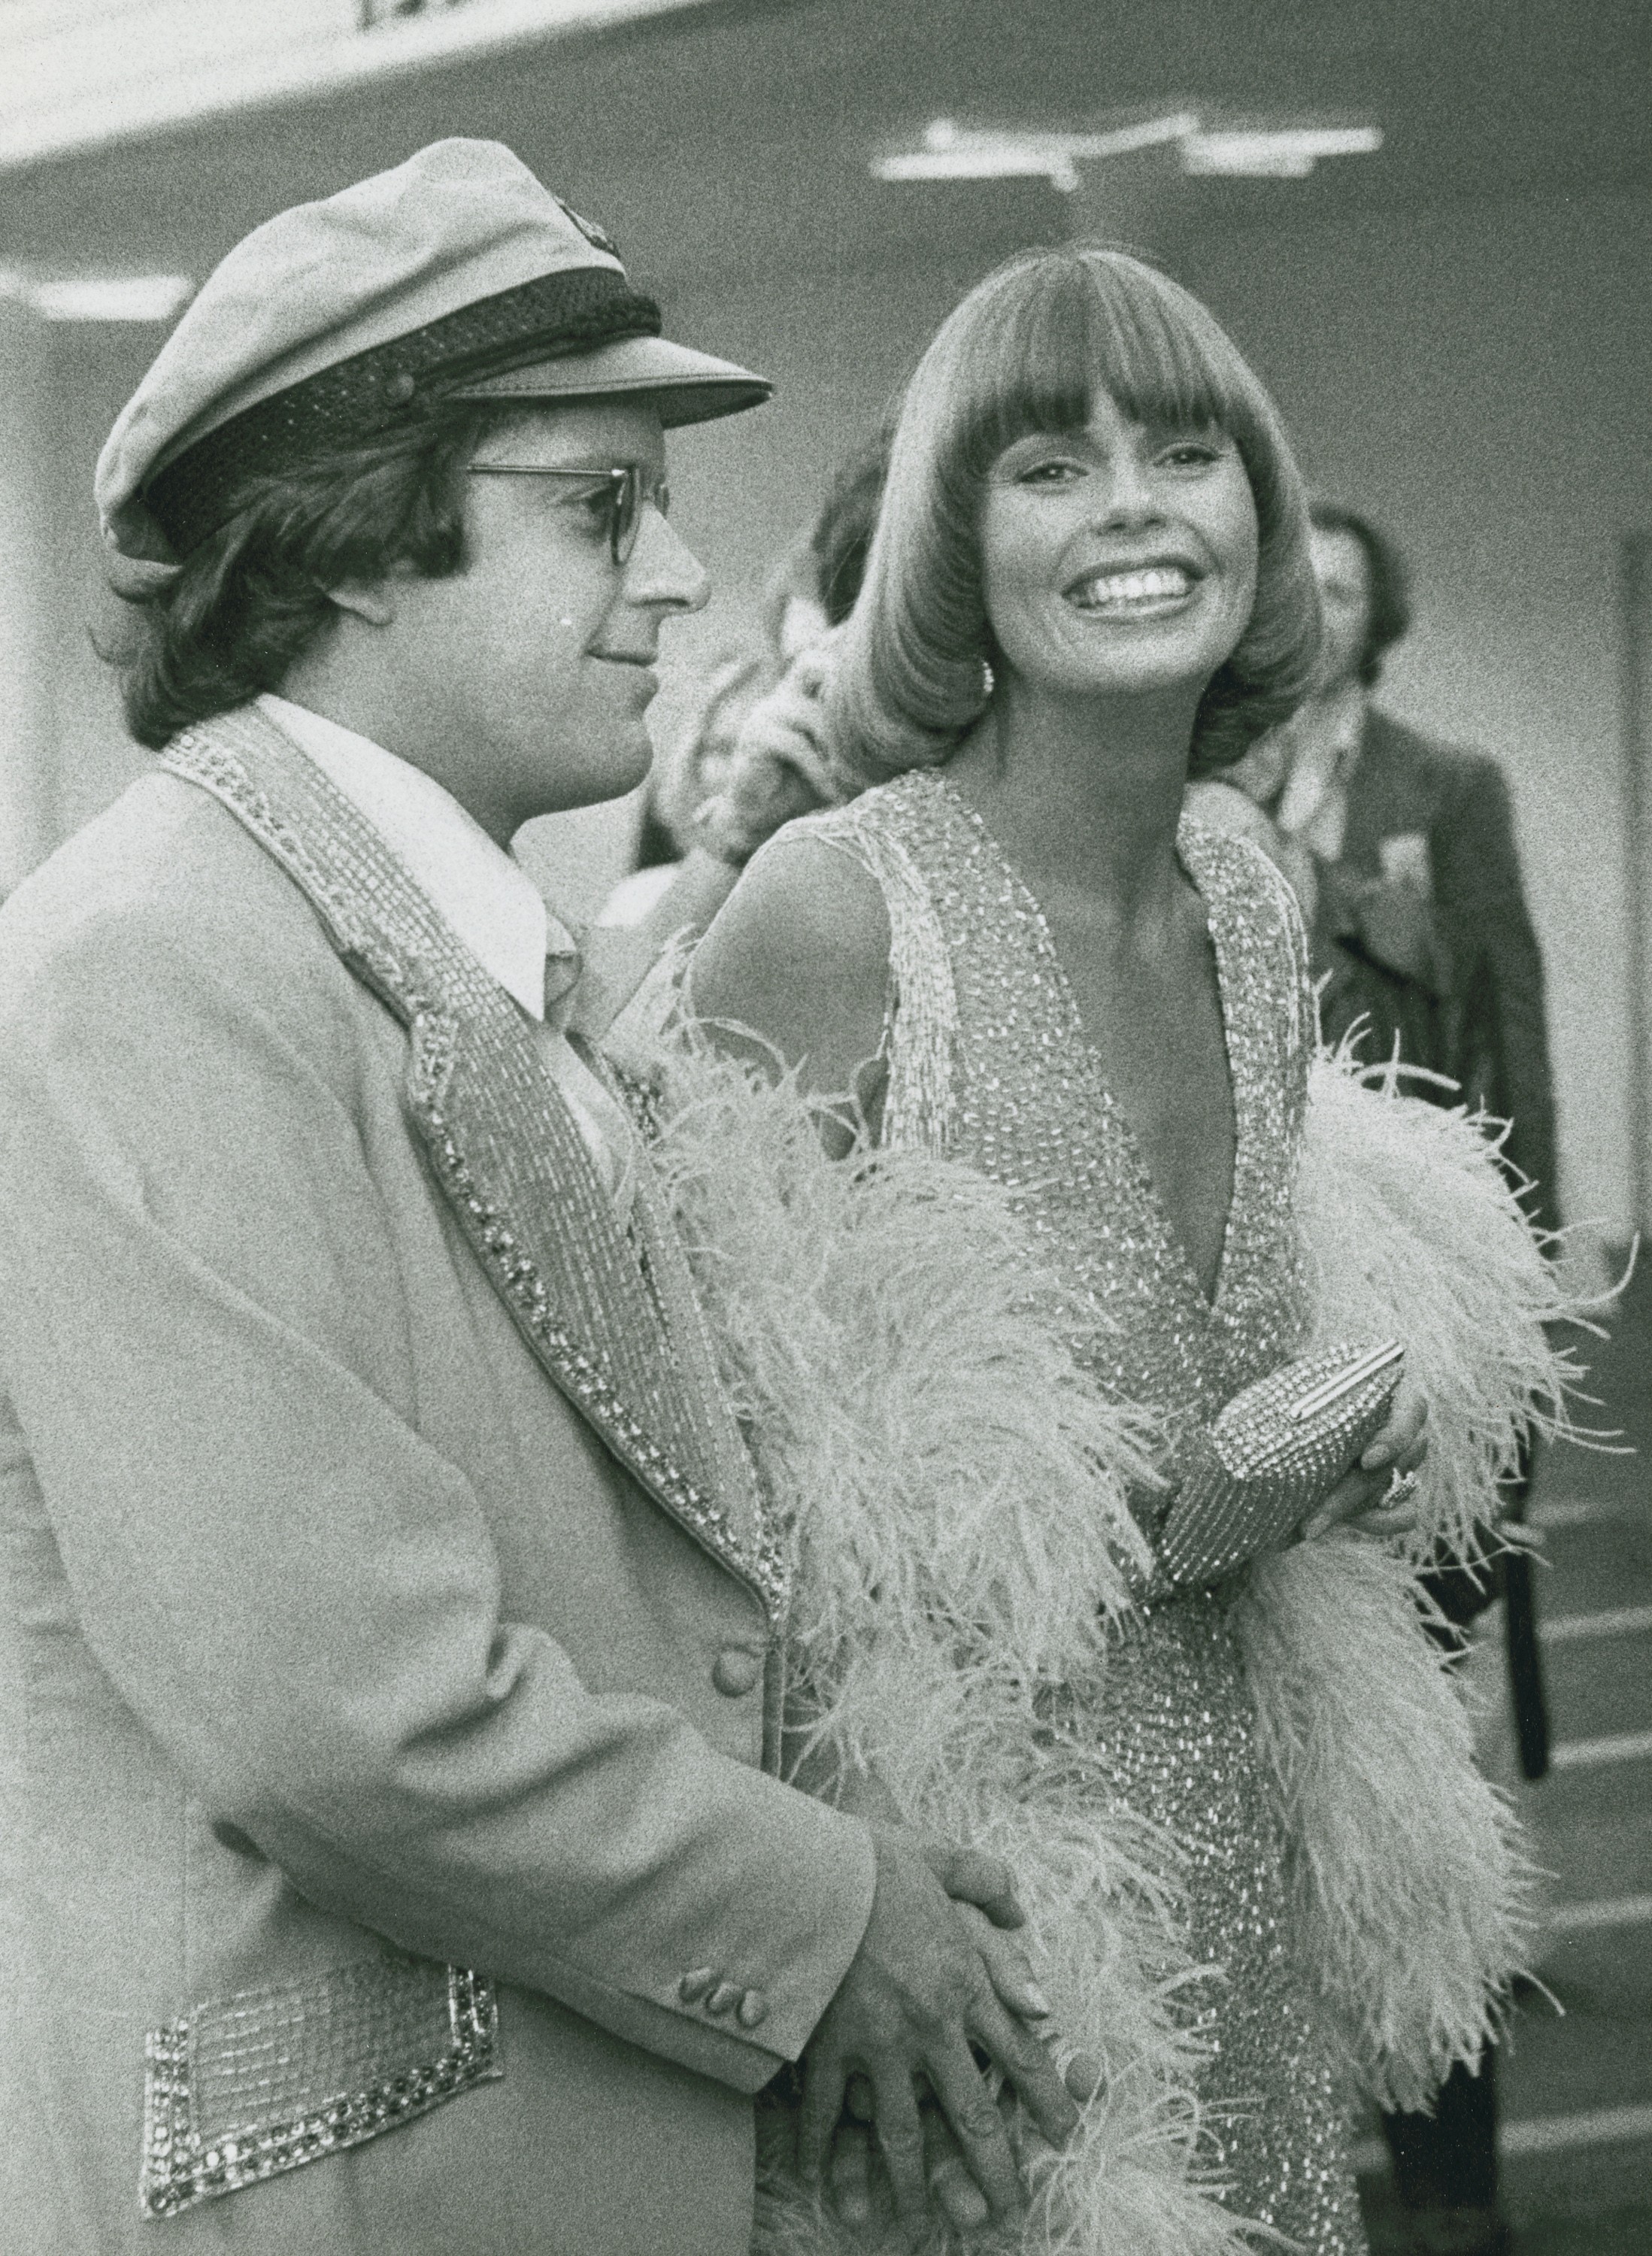 Singers Daryl Dragon and Toni Tennille of Captain and Tennille attending 19th Annual Grammy Awards on February 19, 1977 at the Hollywood Palladium in Hollywood, California. (Photo by Ron Galella/Ron Galella Collection via Getty Images) (Foto: Ron Galella Collection via Getty)